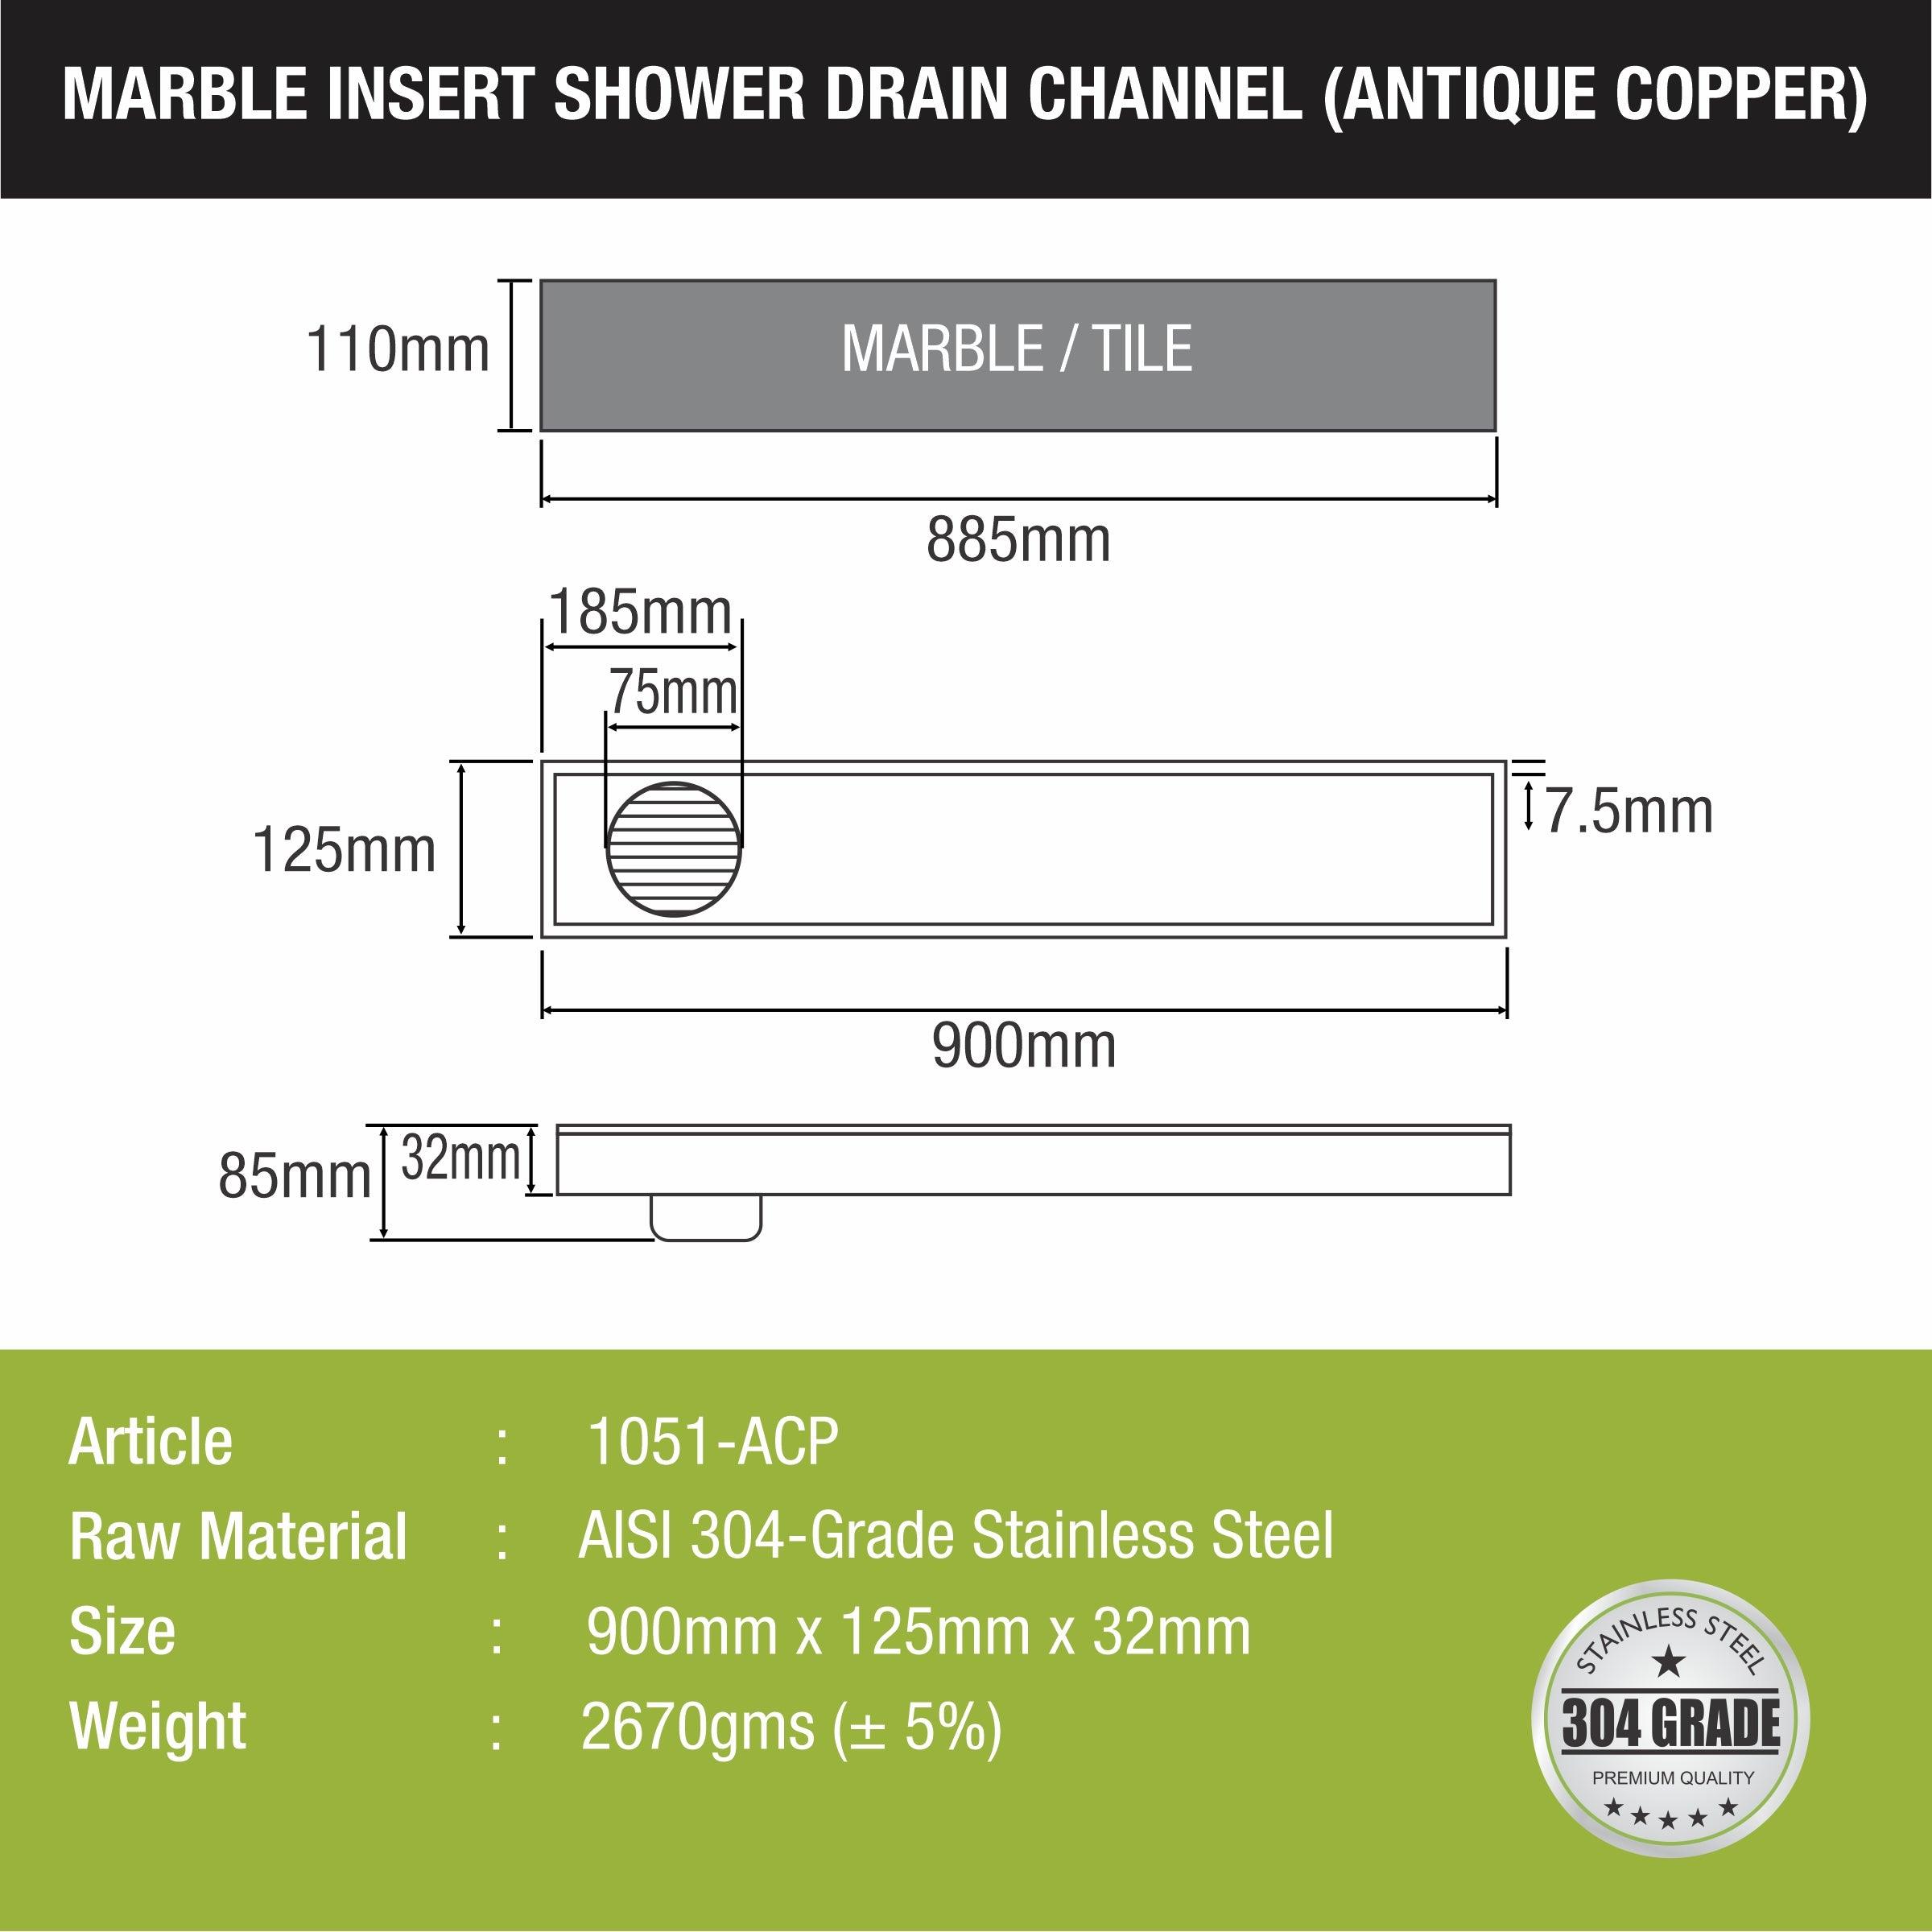 Marble Insert Shower Drain Channel - Antique Copper (36 x 5 Inches) sizes and dimensions